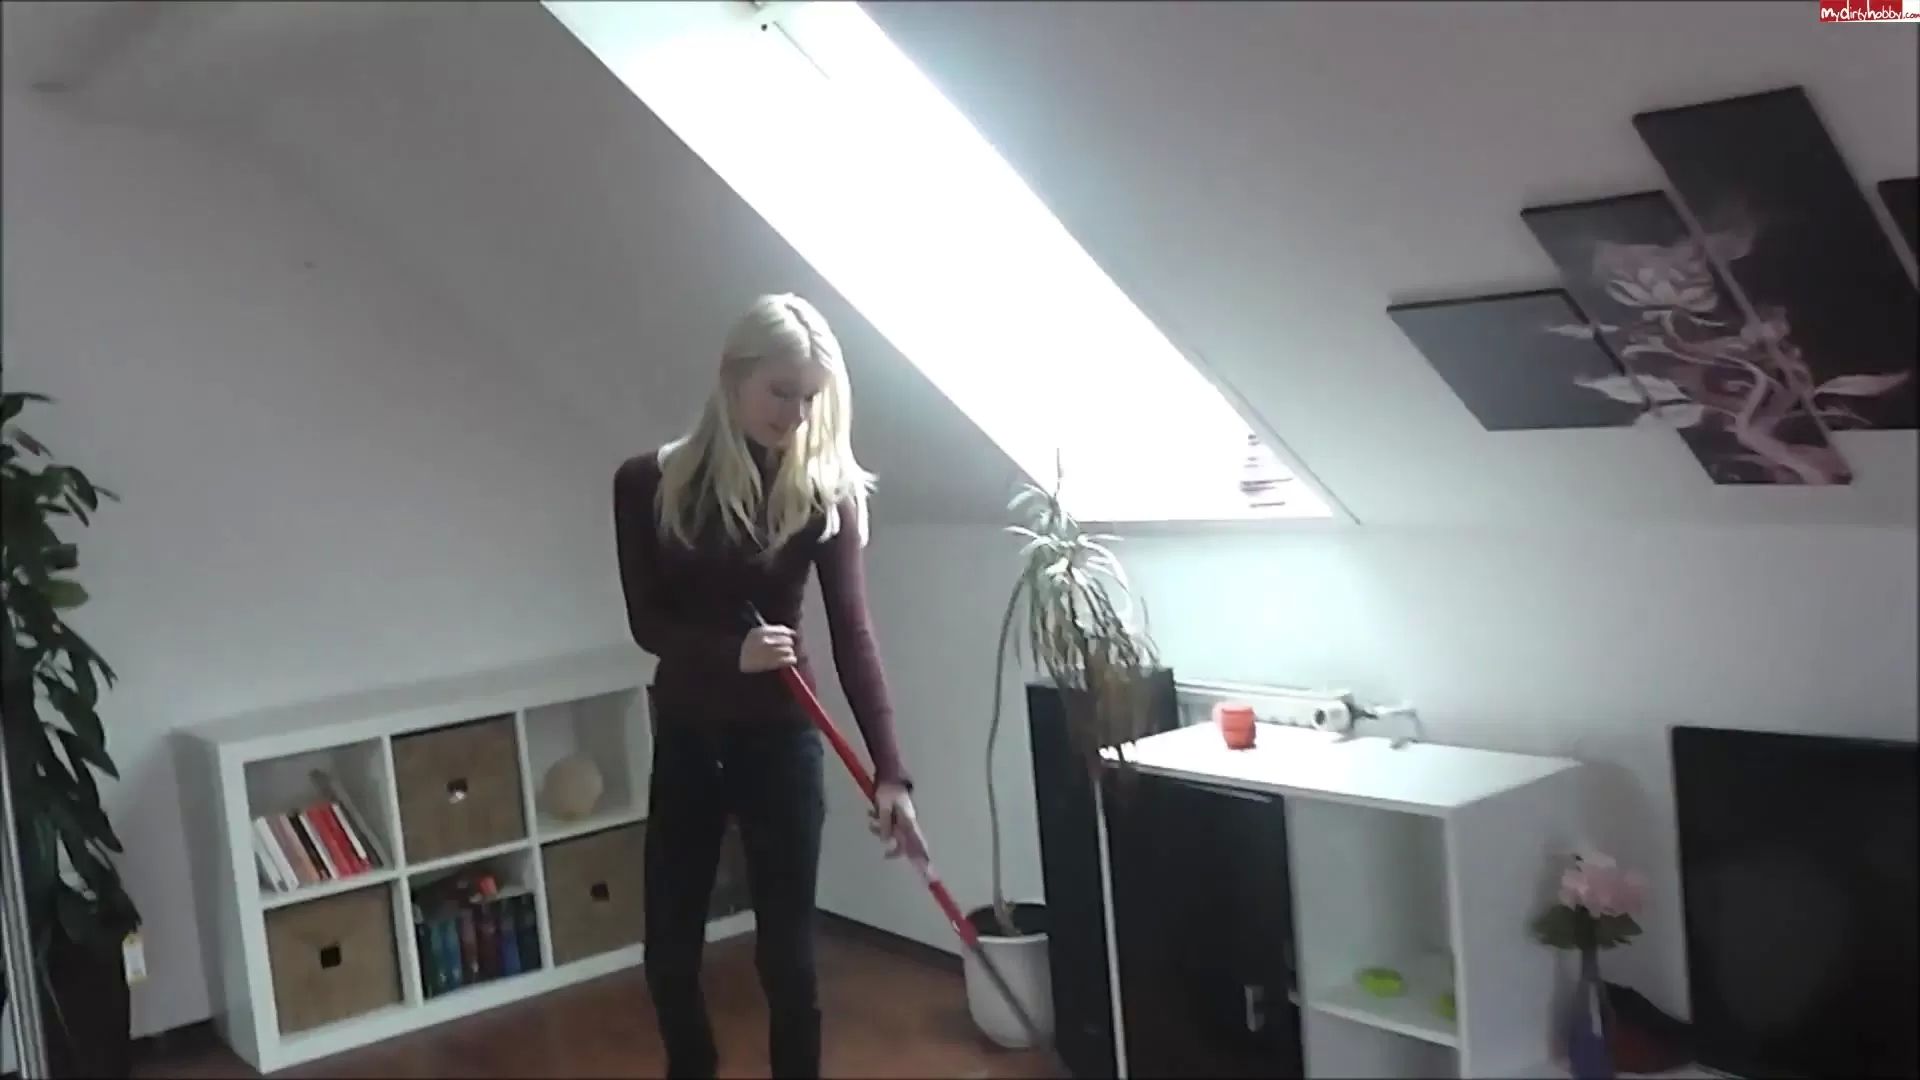 Bondagesex Surprise Bang with Hot Housecleaning GF Creampies